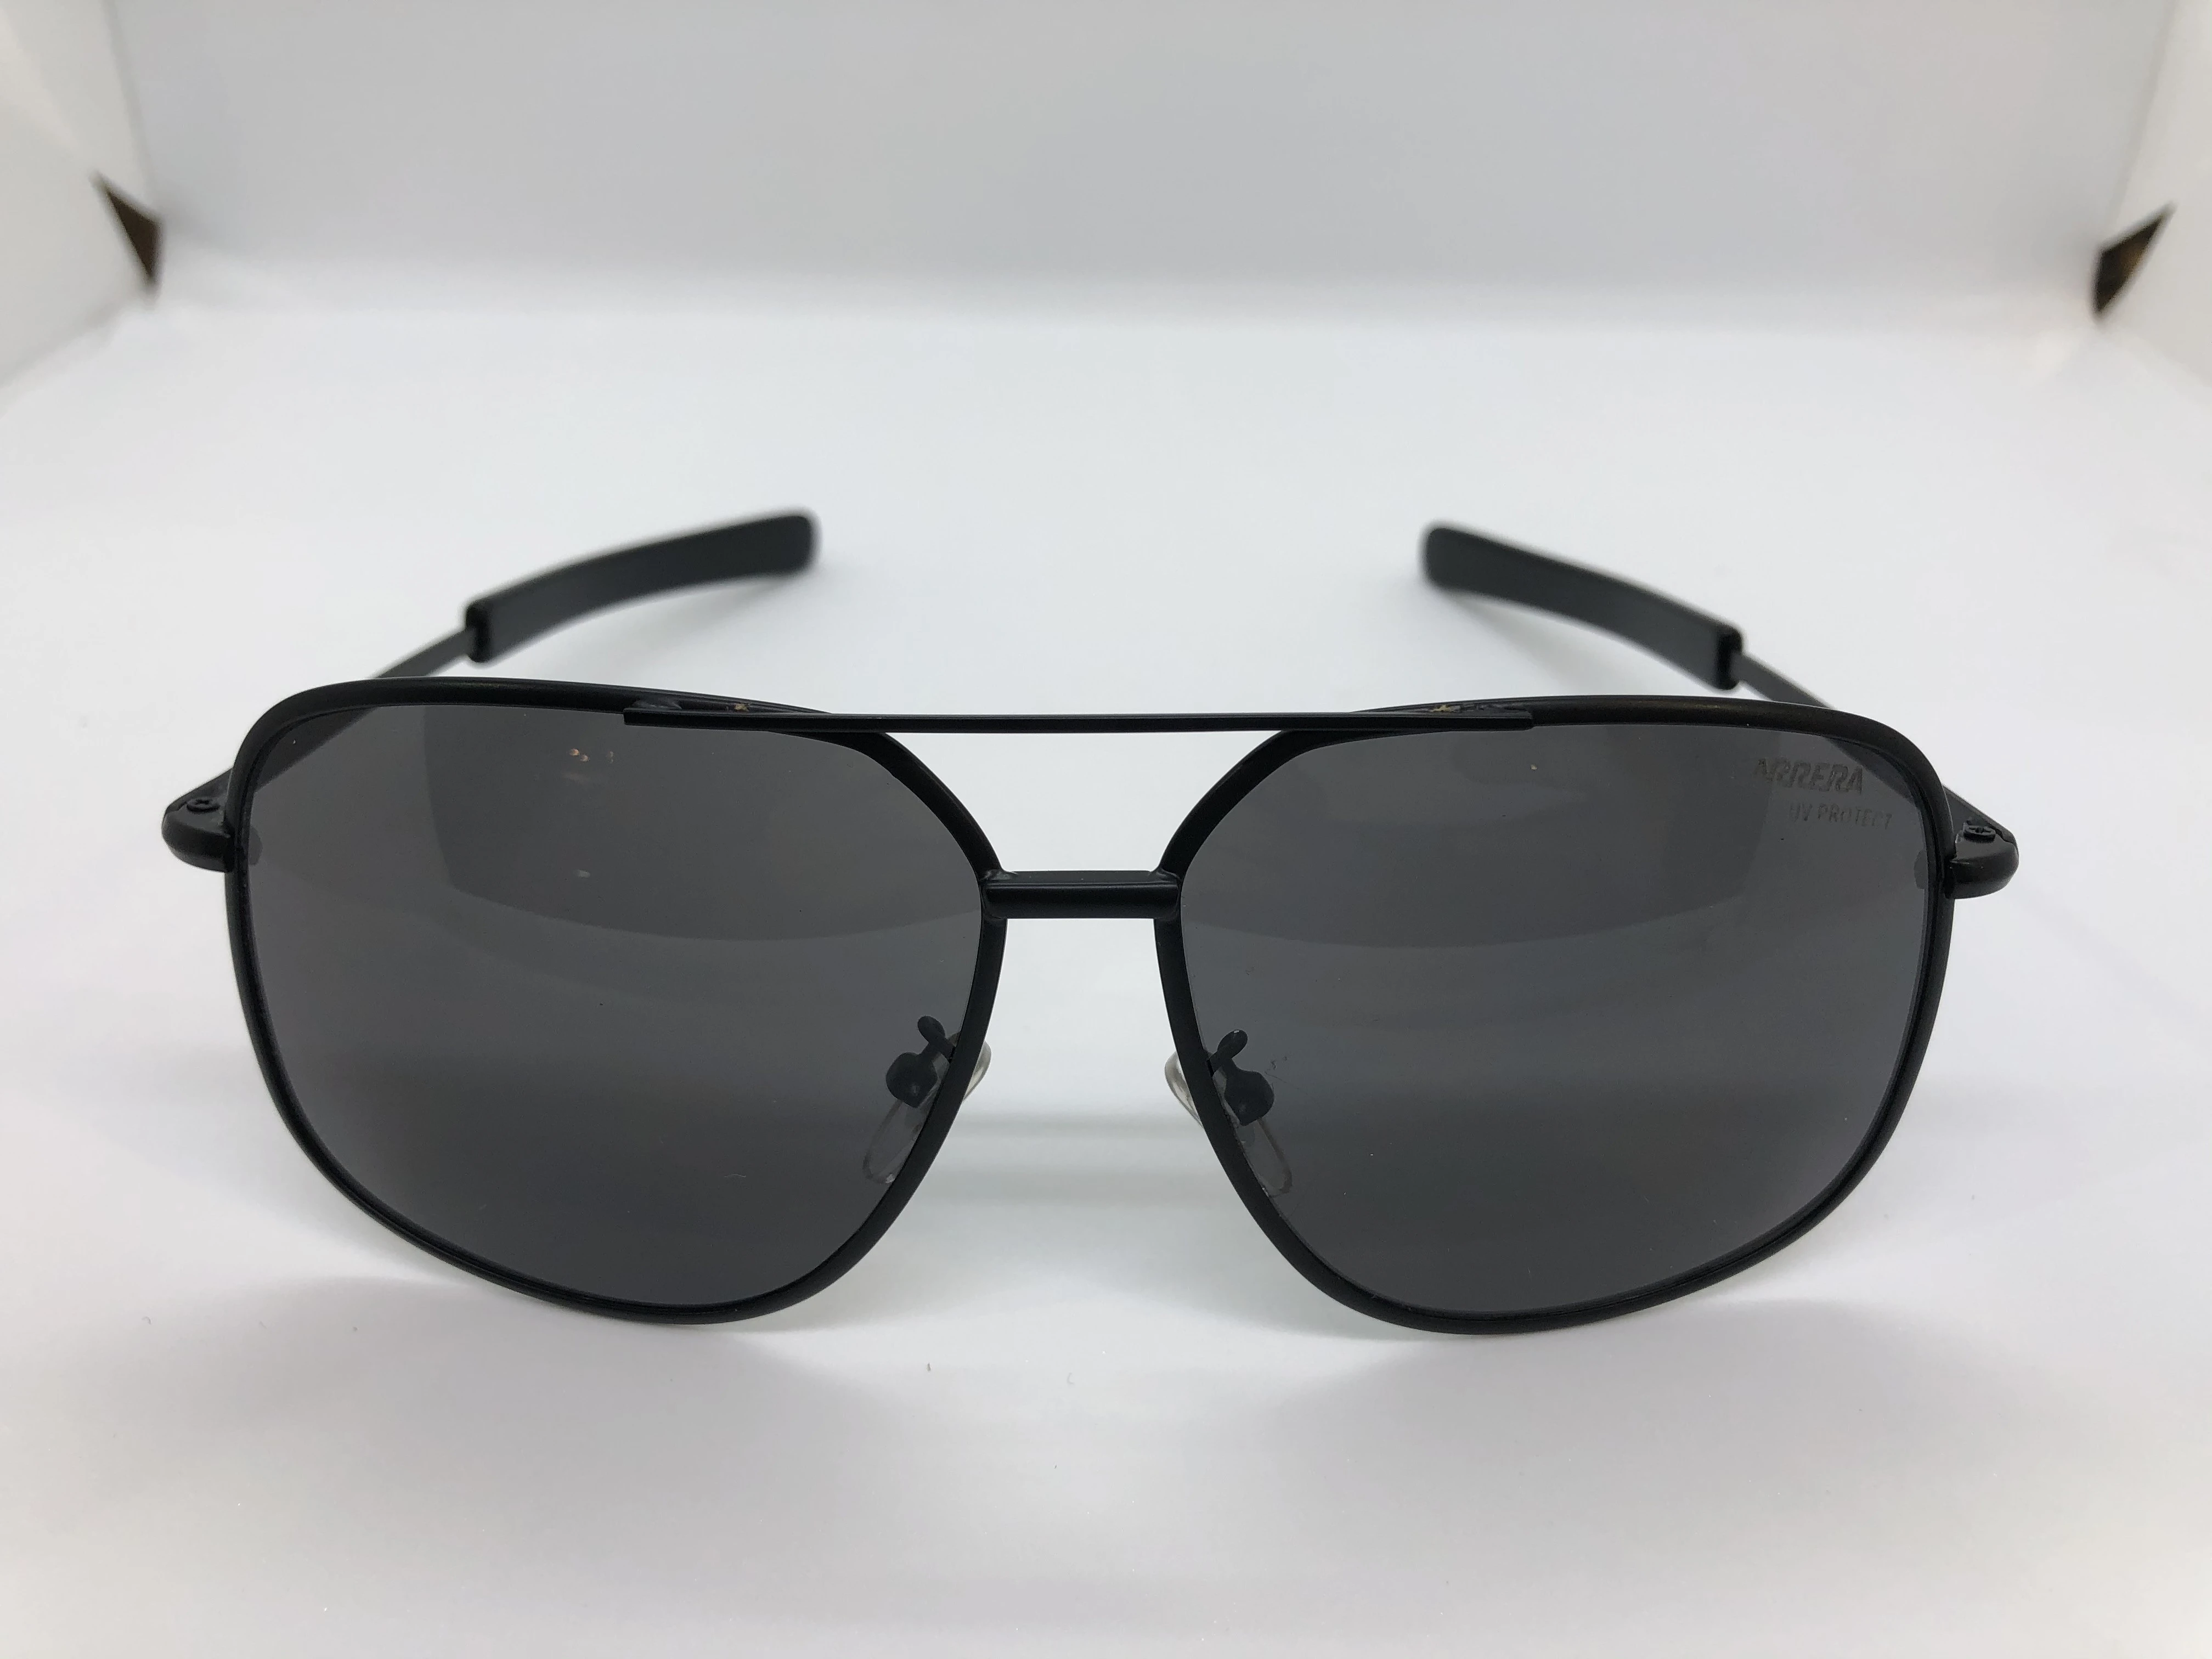 Sunglasses - from Carrera - with a black metal frame - and black lenses - and a black metal arm - for men